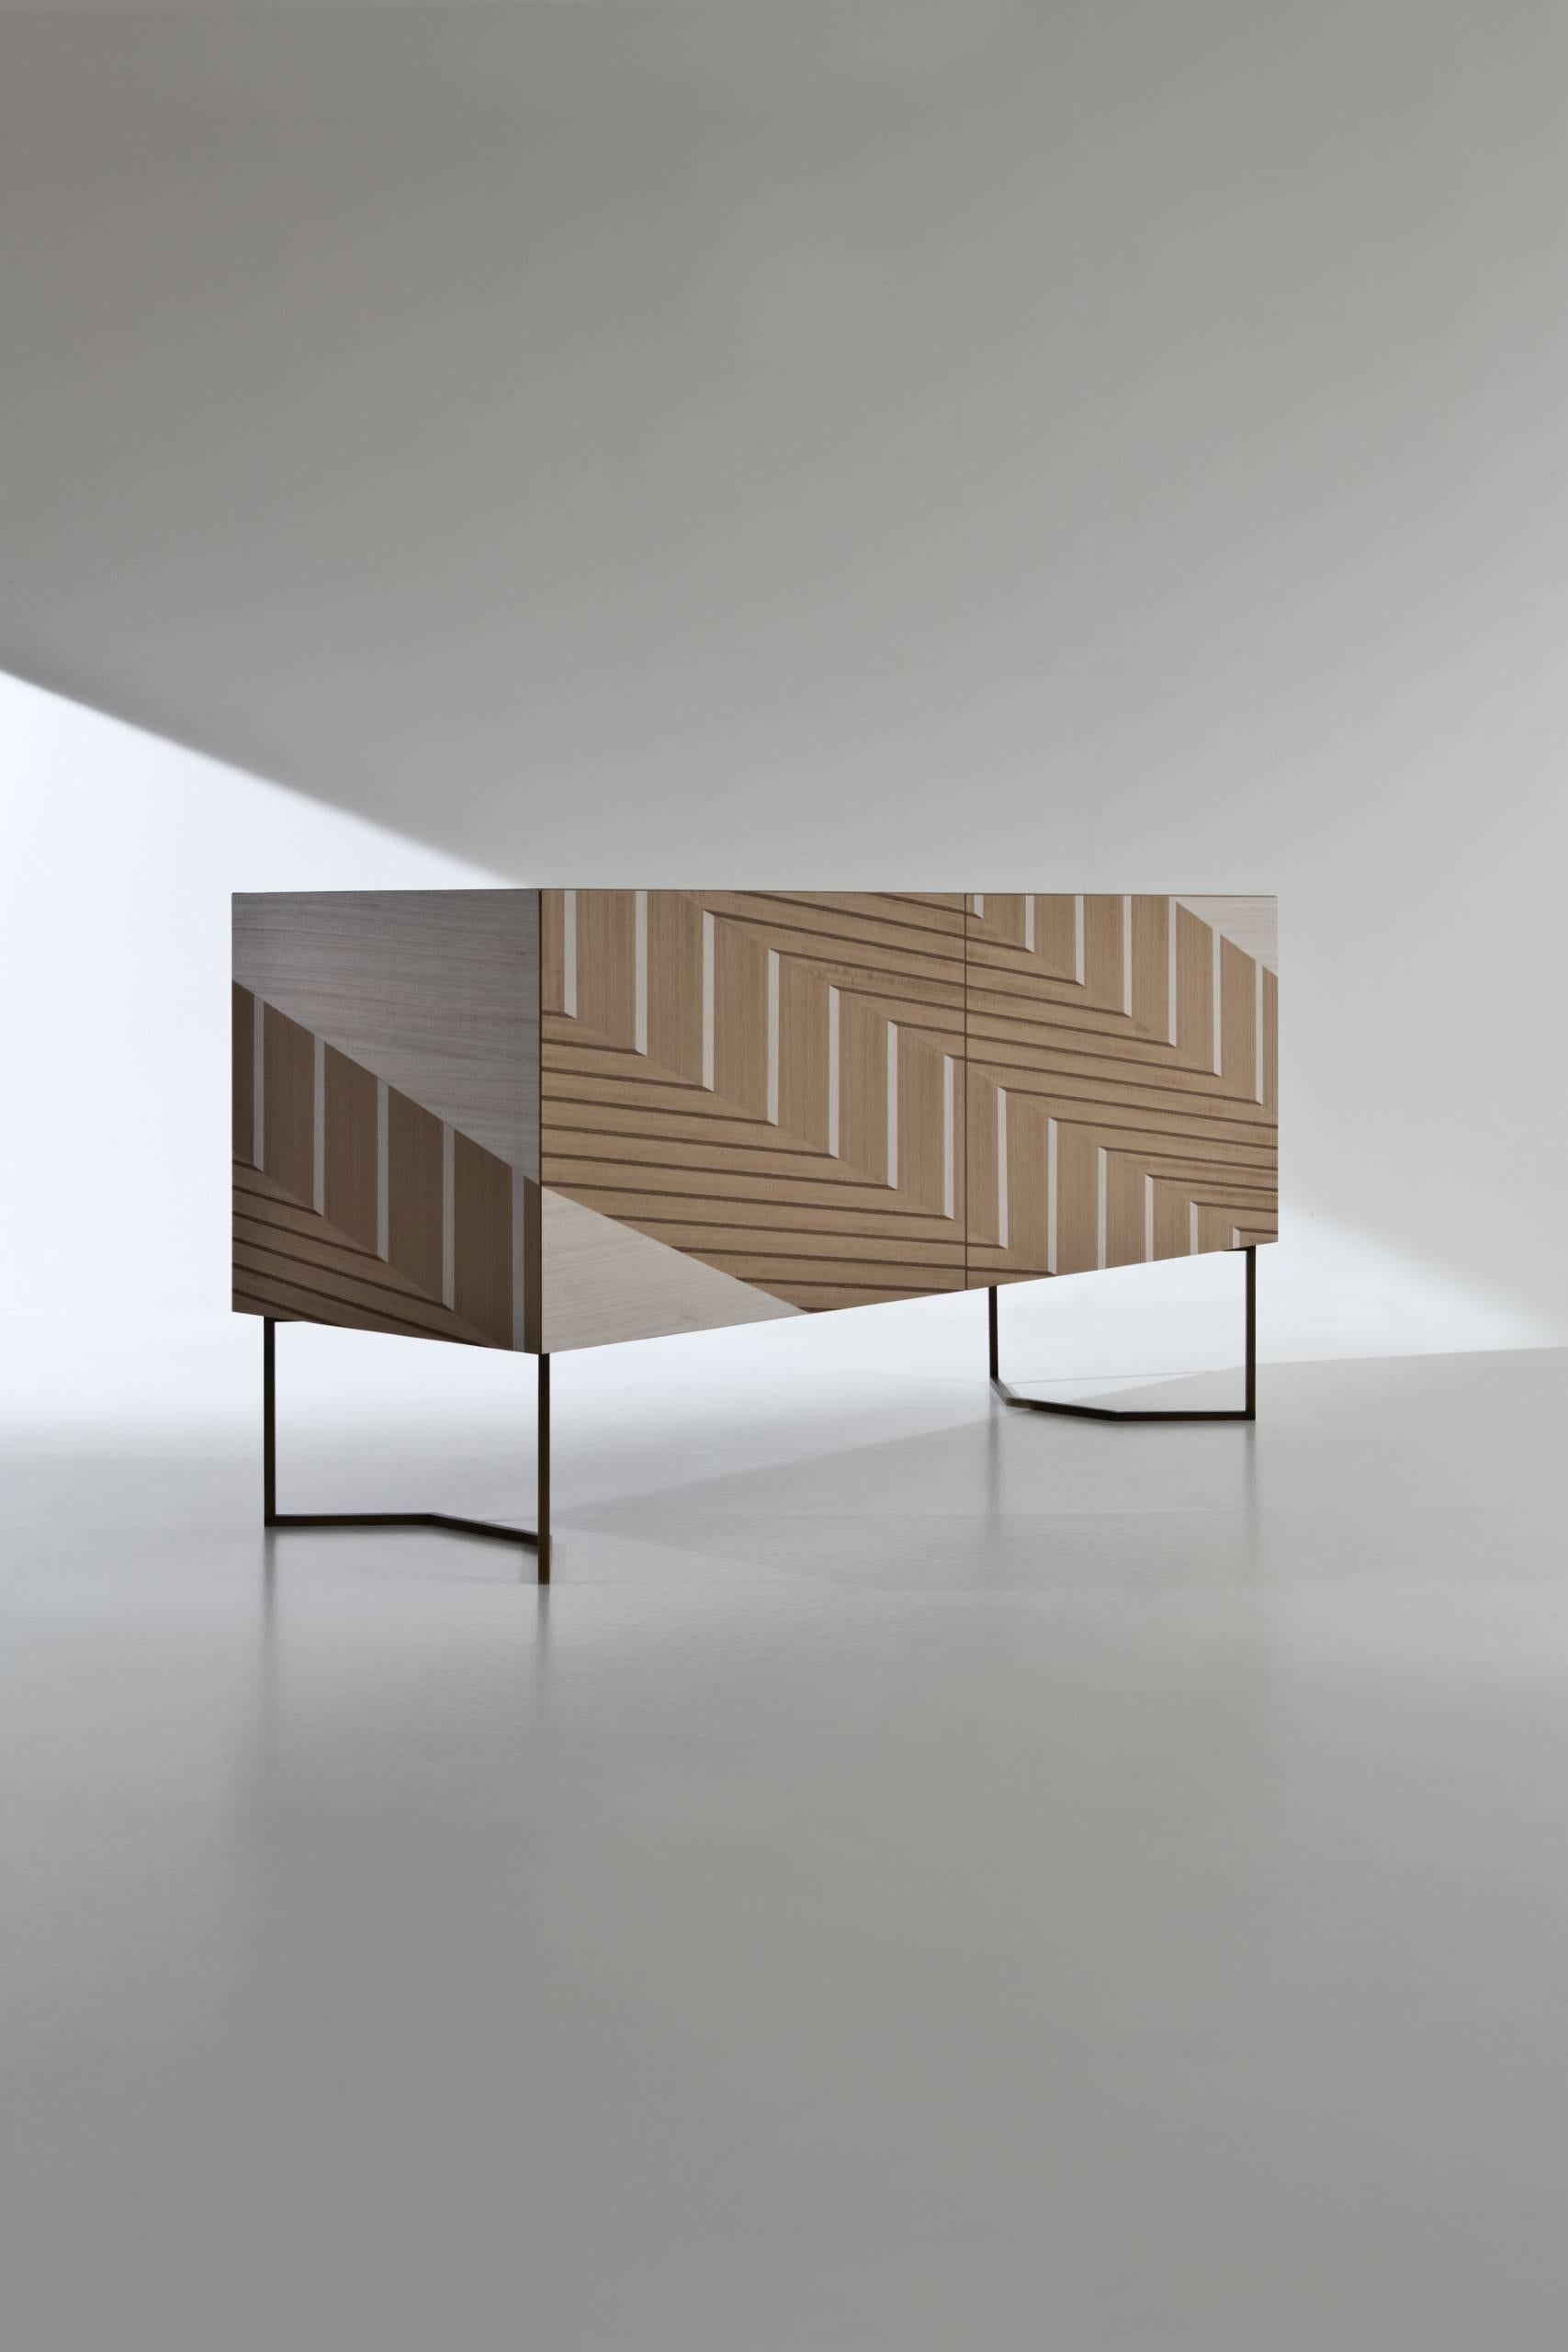 Sideboard with burnished brass legs, inlaid doors and structure. Fitted with push-pull doors, one internal shelf and two drawers.

FINISH:
Limited Edition Art Inlay

Twill is a sideboard enveloped by a mosaic of Eucalyptus, Oak and Tay wood